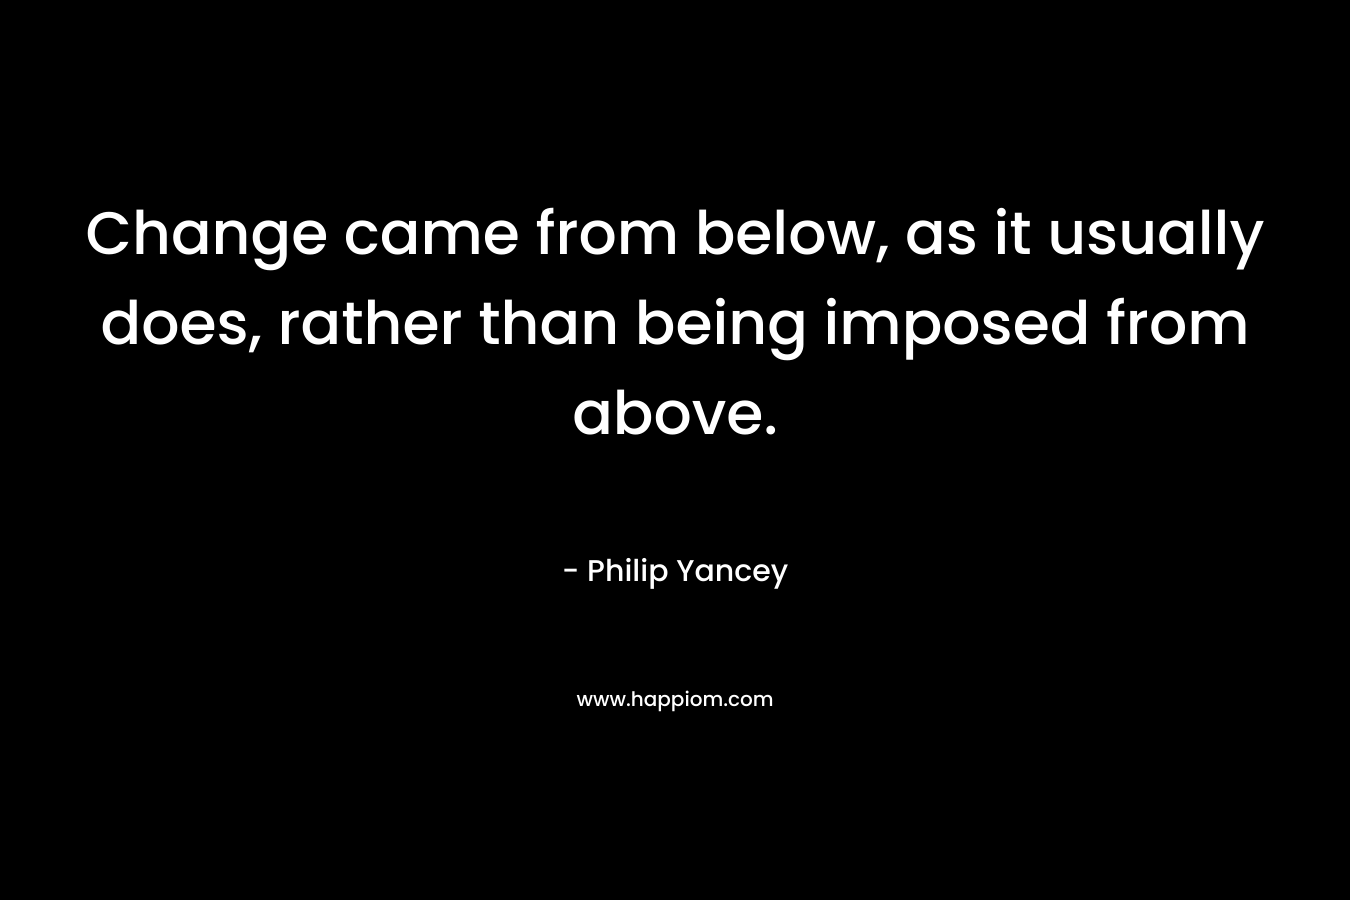 Change came from below, as it usually does, rather than being imposed from above.